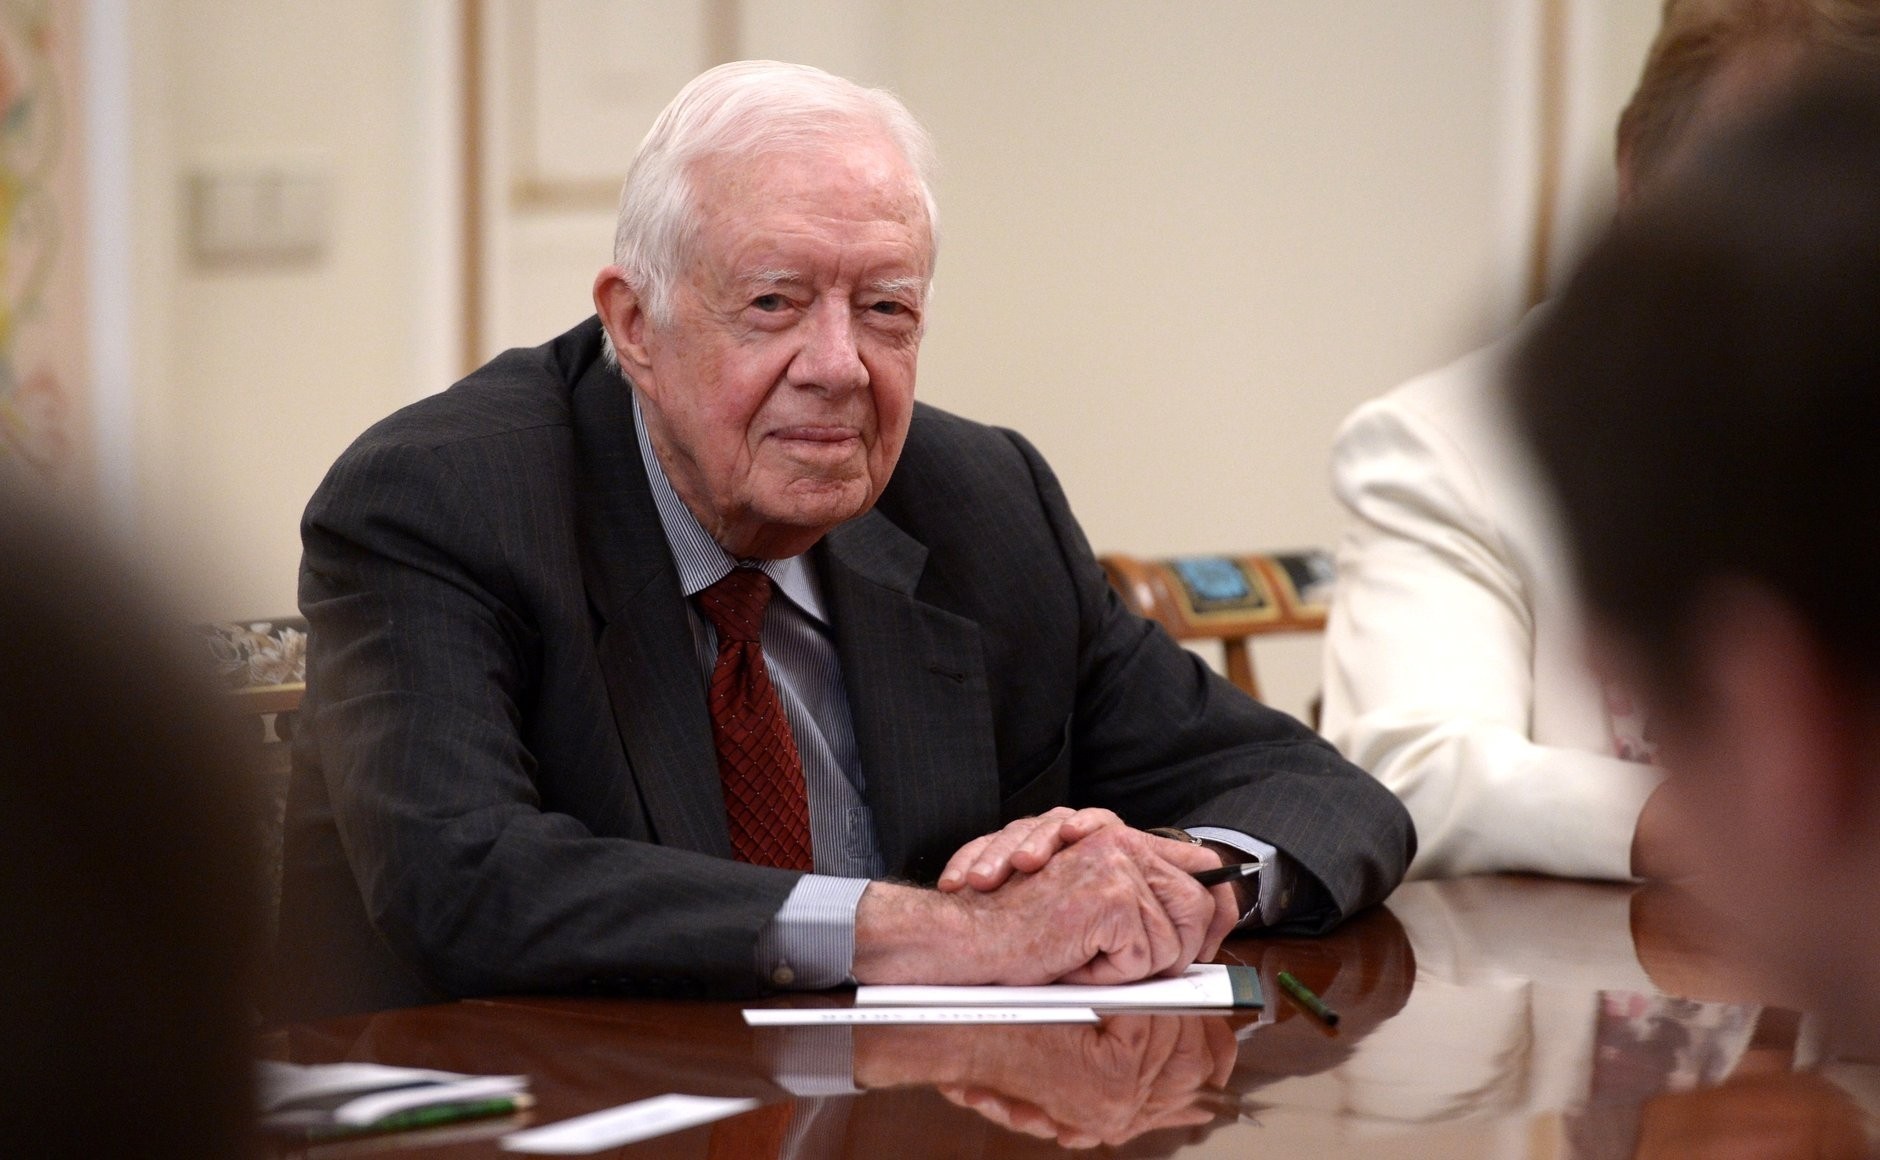 Former US President Jimmy Carter attending a meeting in Moscow, Russia on April 29, 2015 | Source: Getty Images